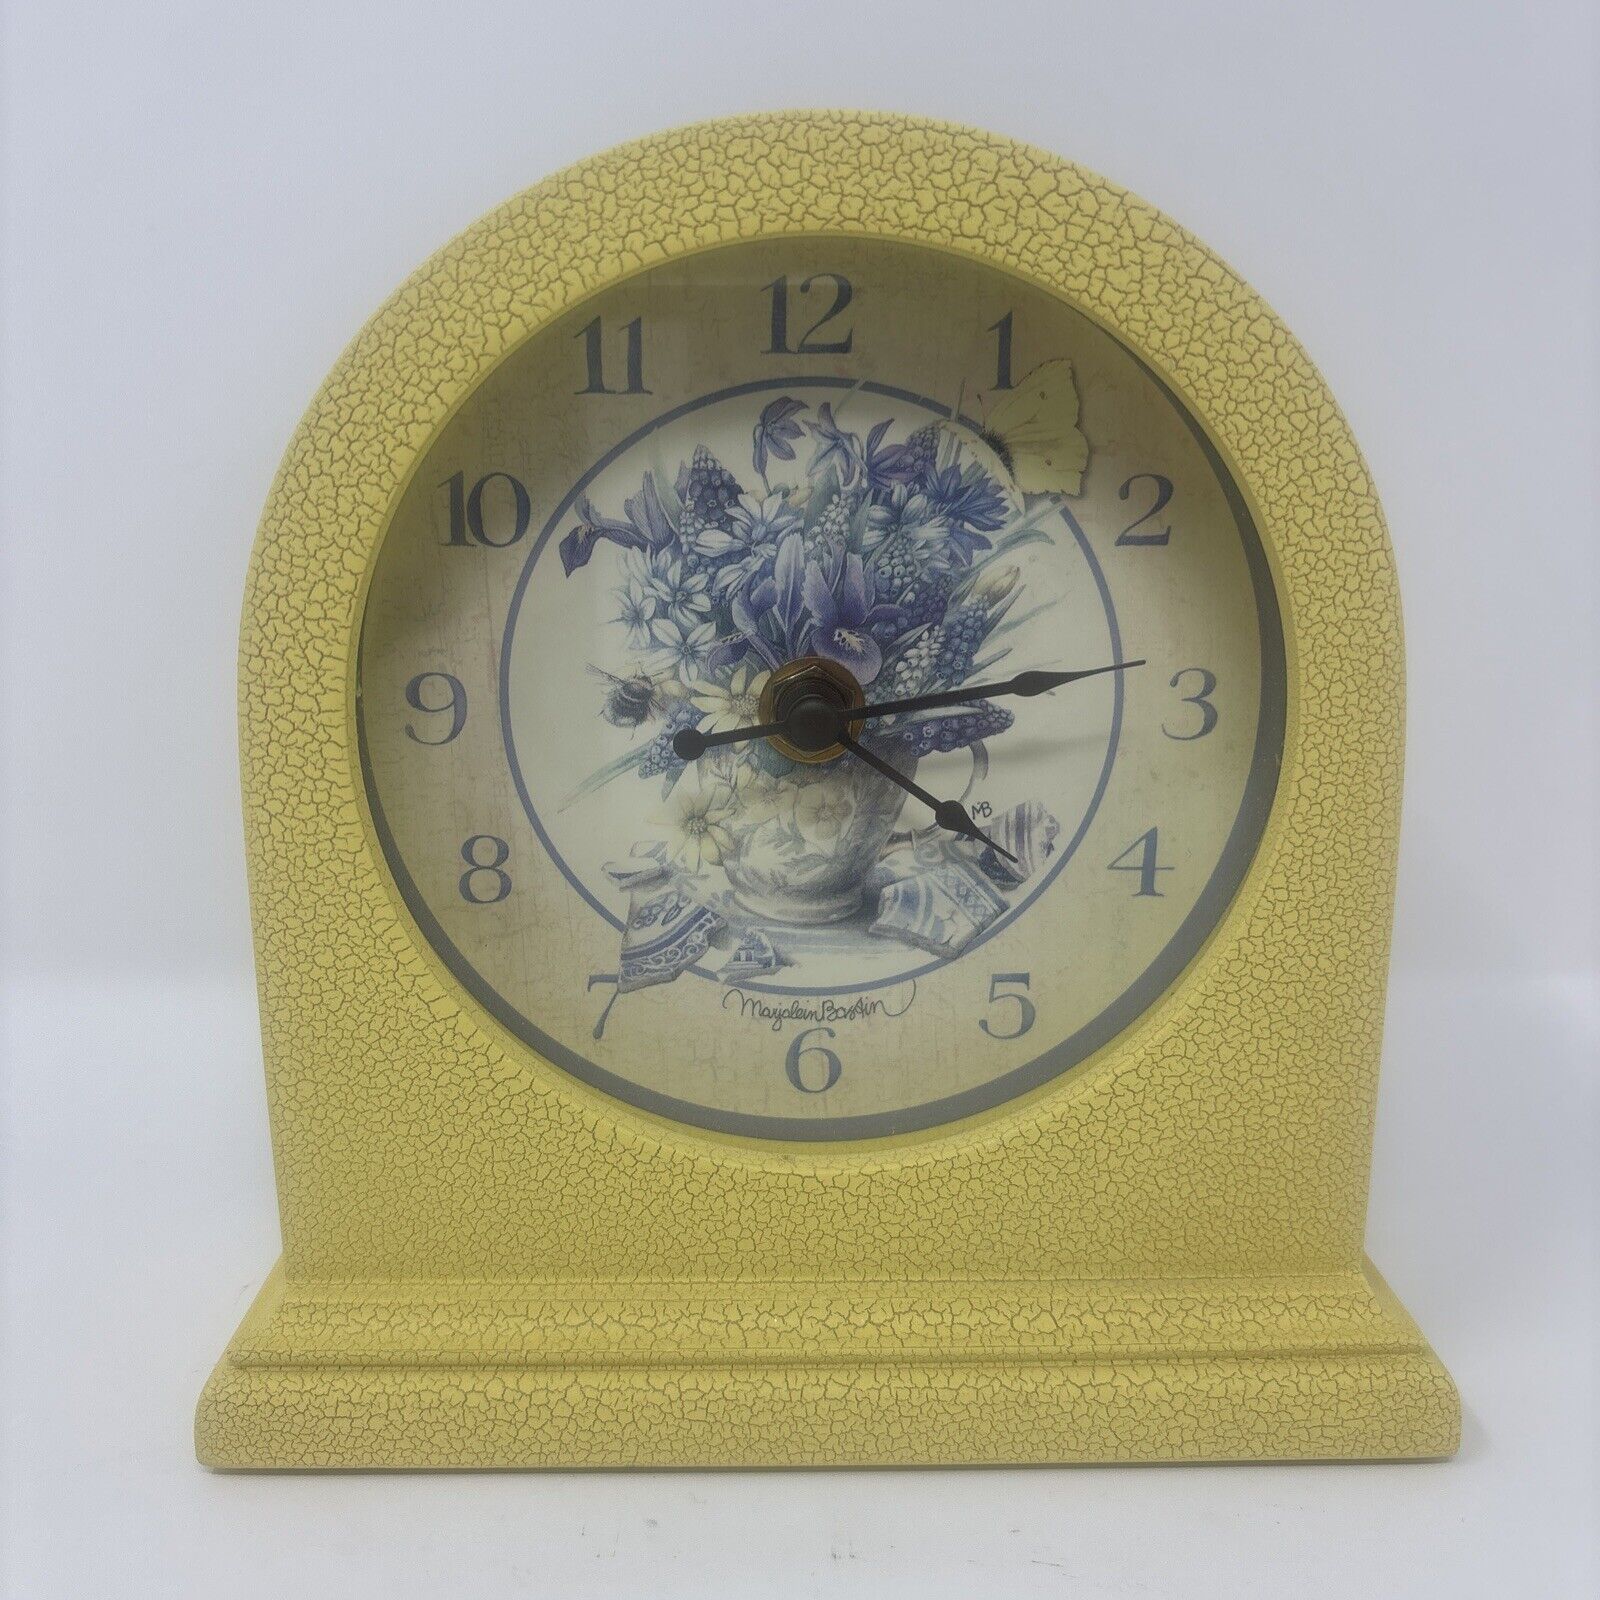 Marjolein Bastin Clock with Yellow & Blue Tea Cup & Flowers